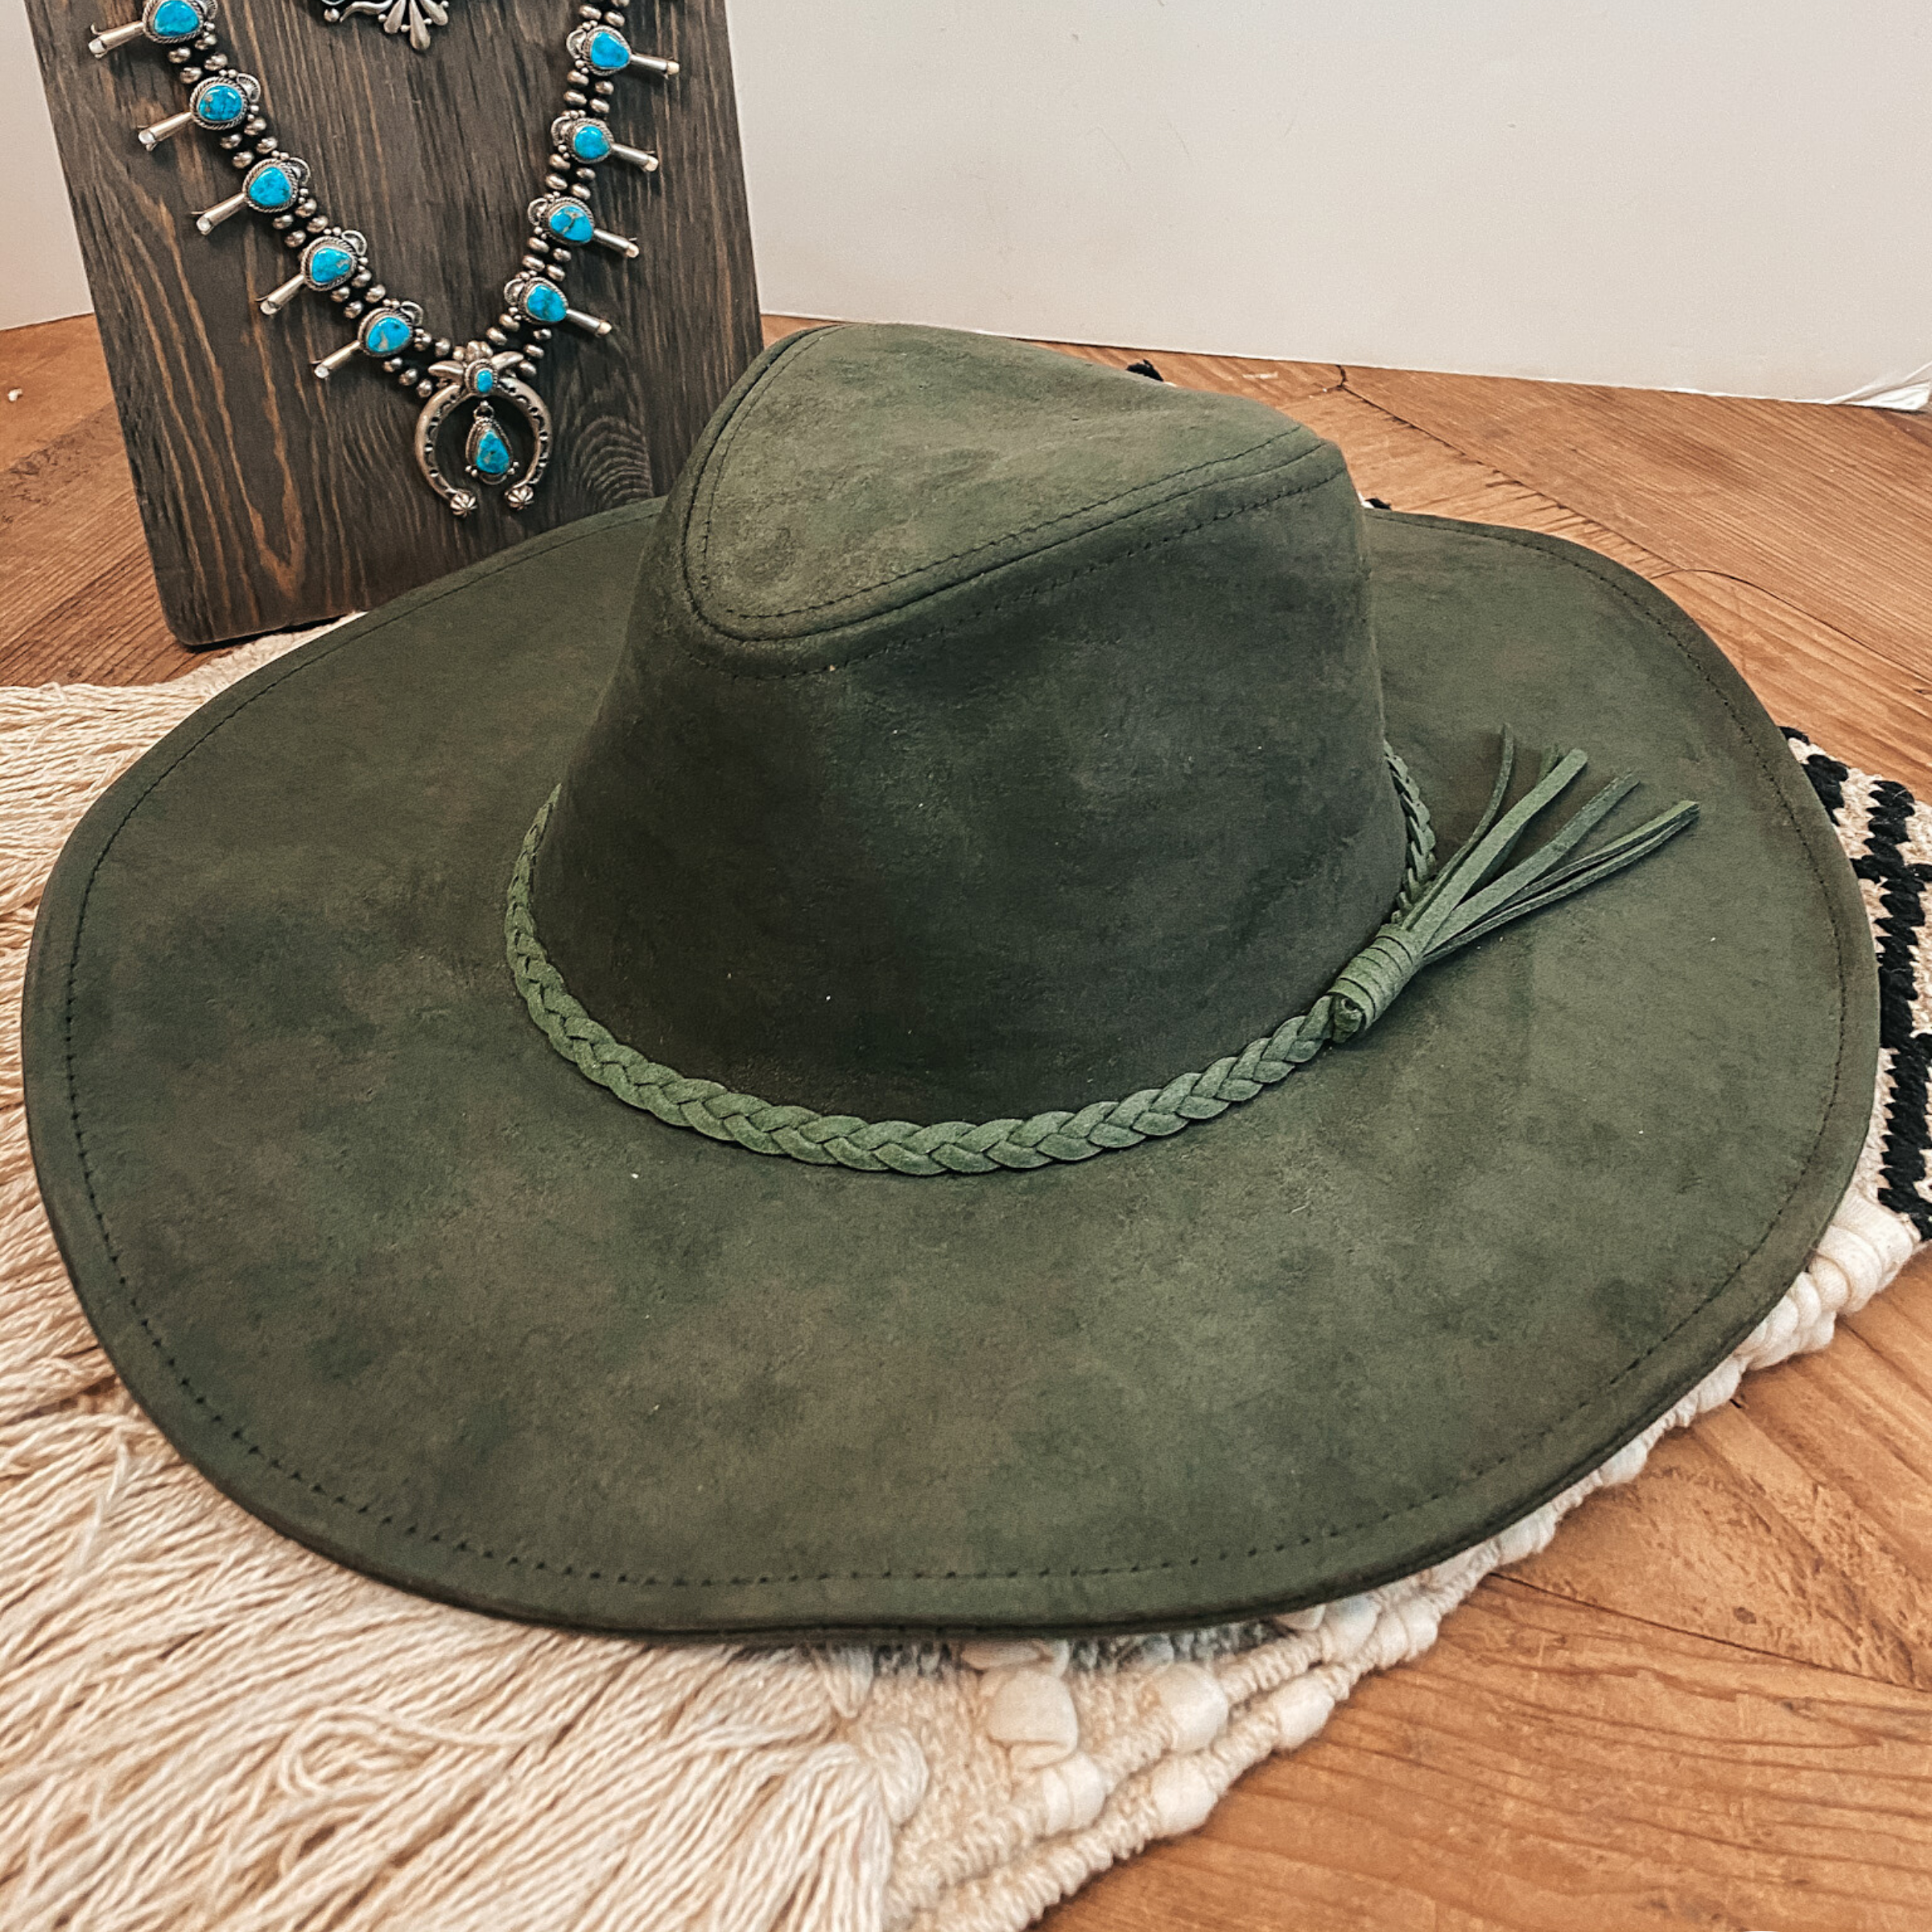 Oklahoma Hills Floppy Brim Faux Felt Hat in Olive Green - Giddy Up Glamour Boutique